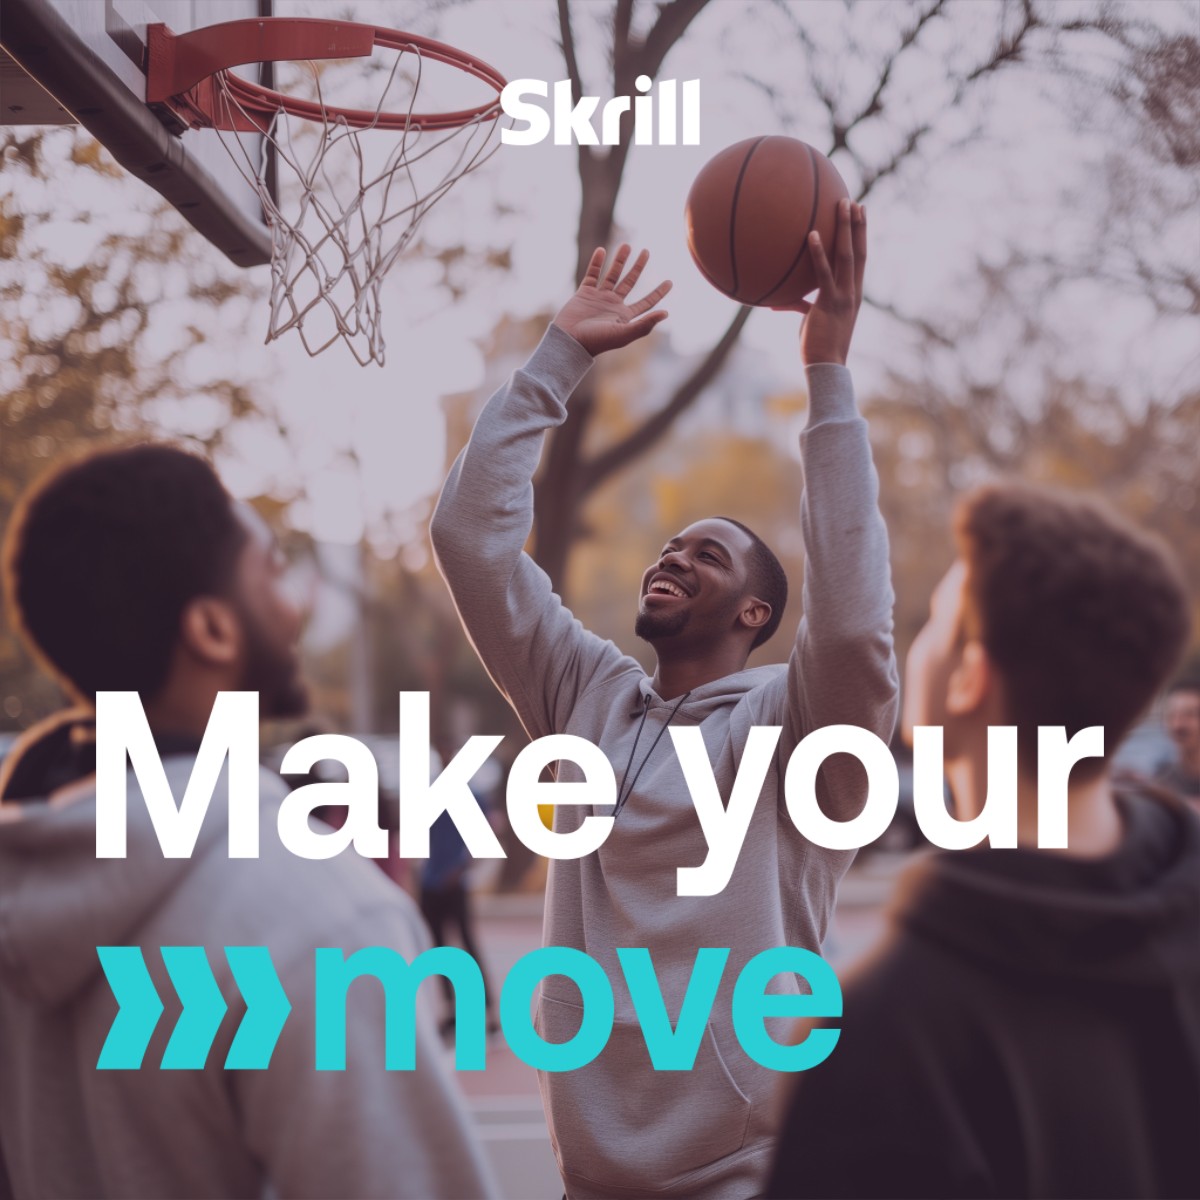 🏀 Enjoy basketball season with Skrill & explore benefits such as: 🌐 Online wallet 💨 Quick & discreet payments 🏆 Winning tips, live game tracking, insights & more Sign up today: utm.io/ugFK1 #digitalwallet #skrill #money #mastercard #secure